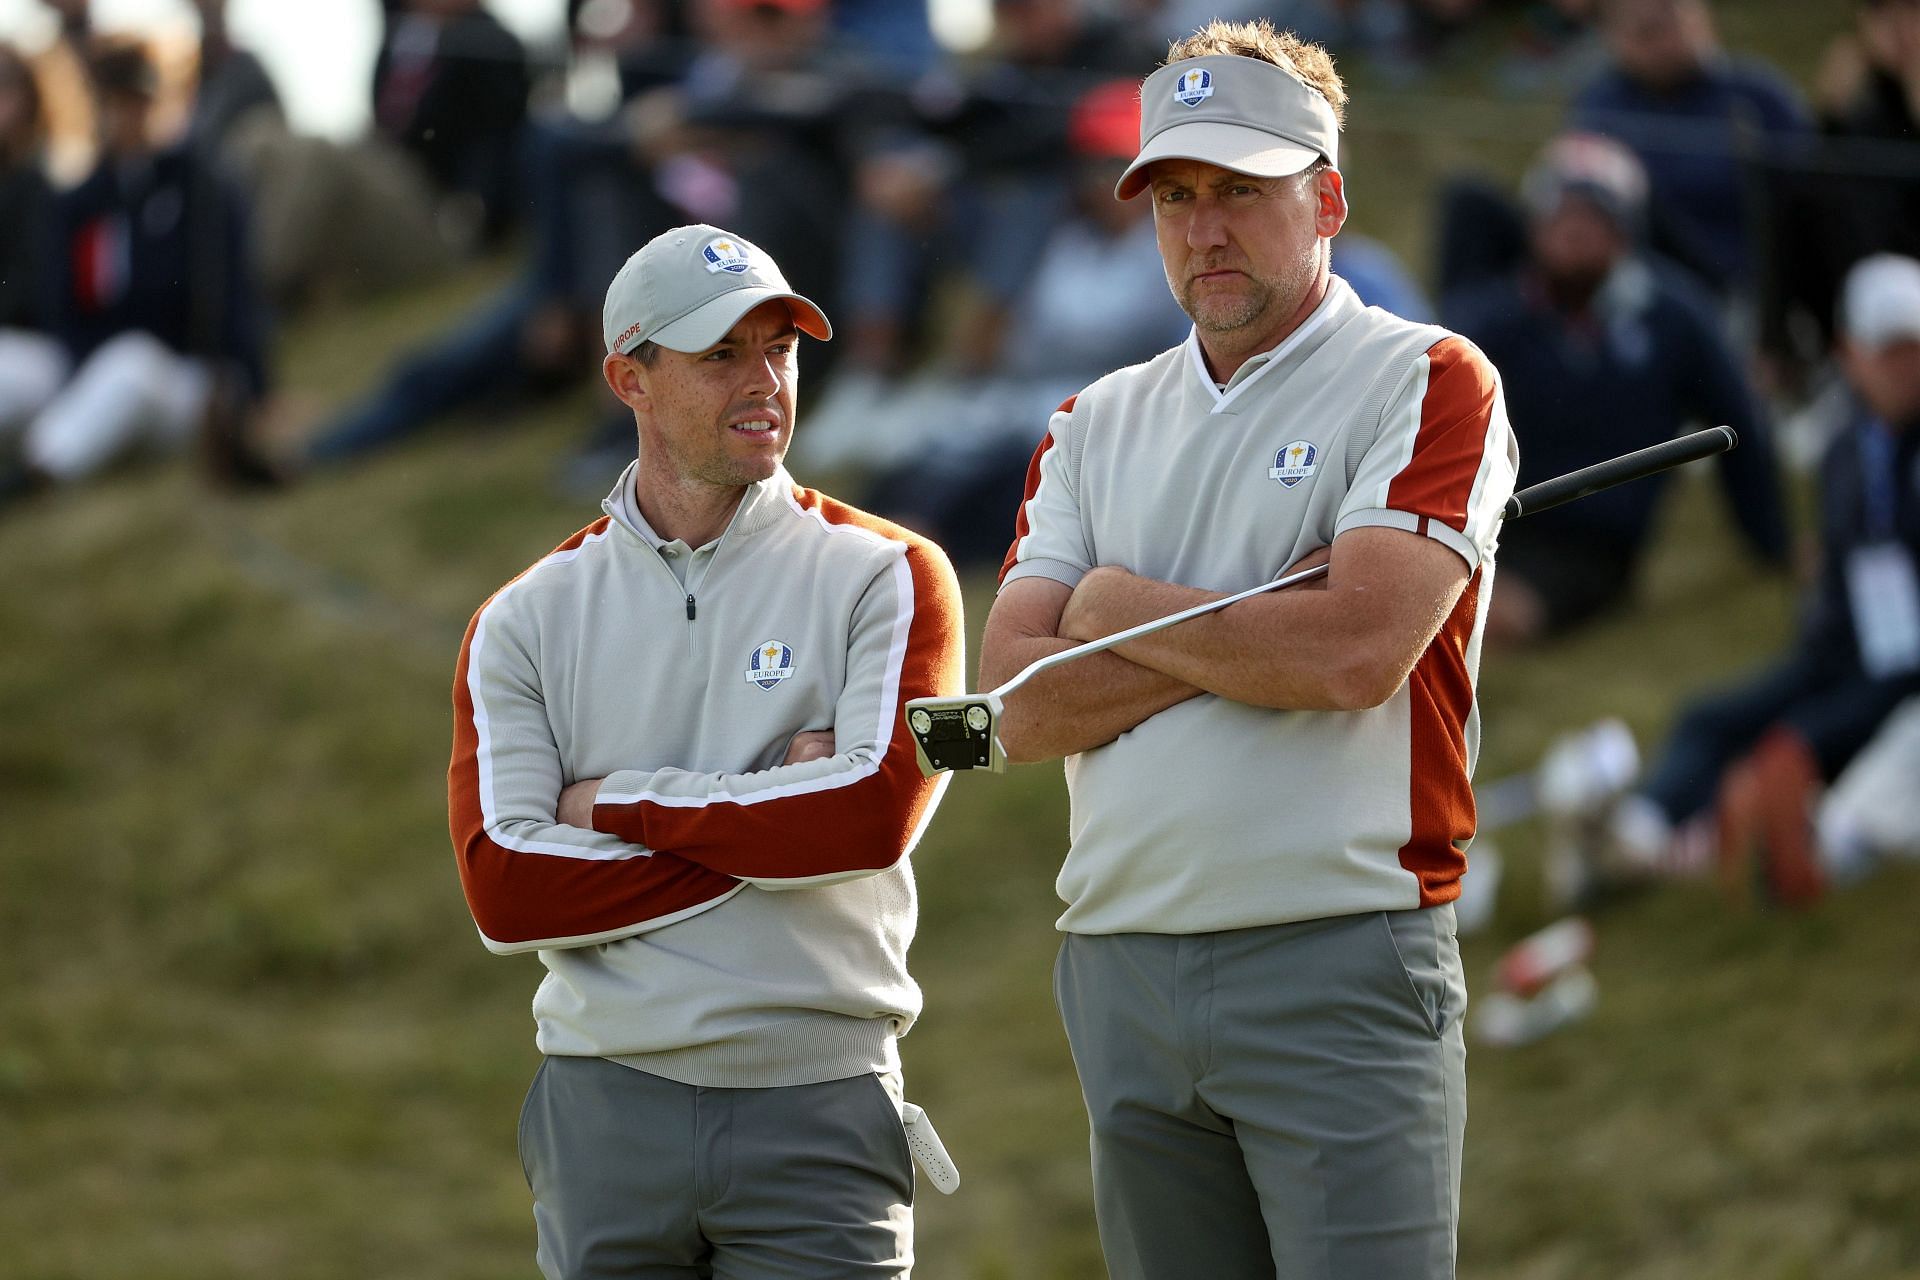 Ian Poulter and Rory McIlroy at the 43rd Ryder Cup - Afternoon Fourball Matches (Image via Patrick Smith/Getty Images)